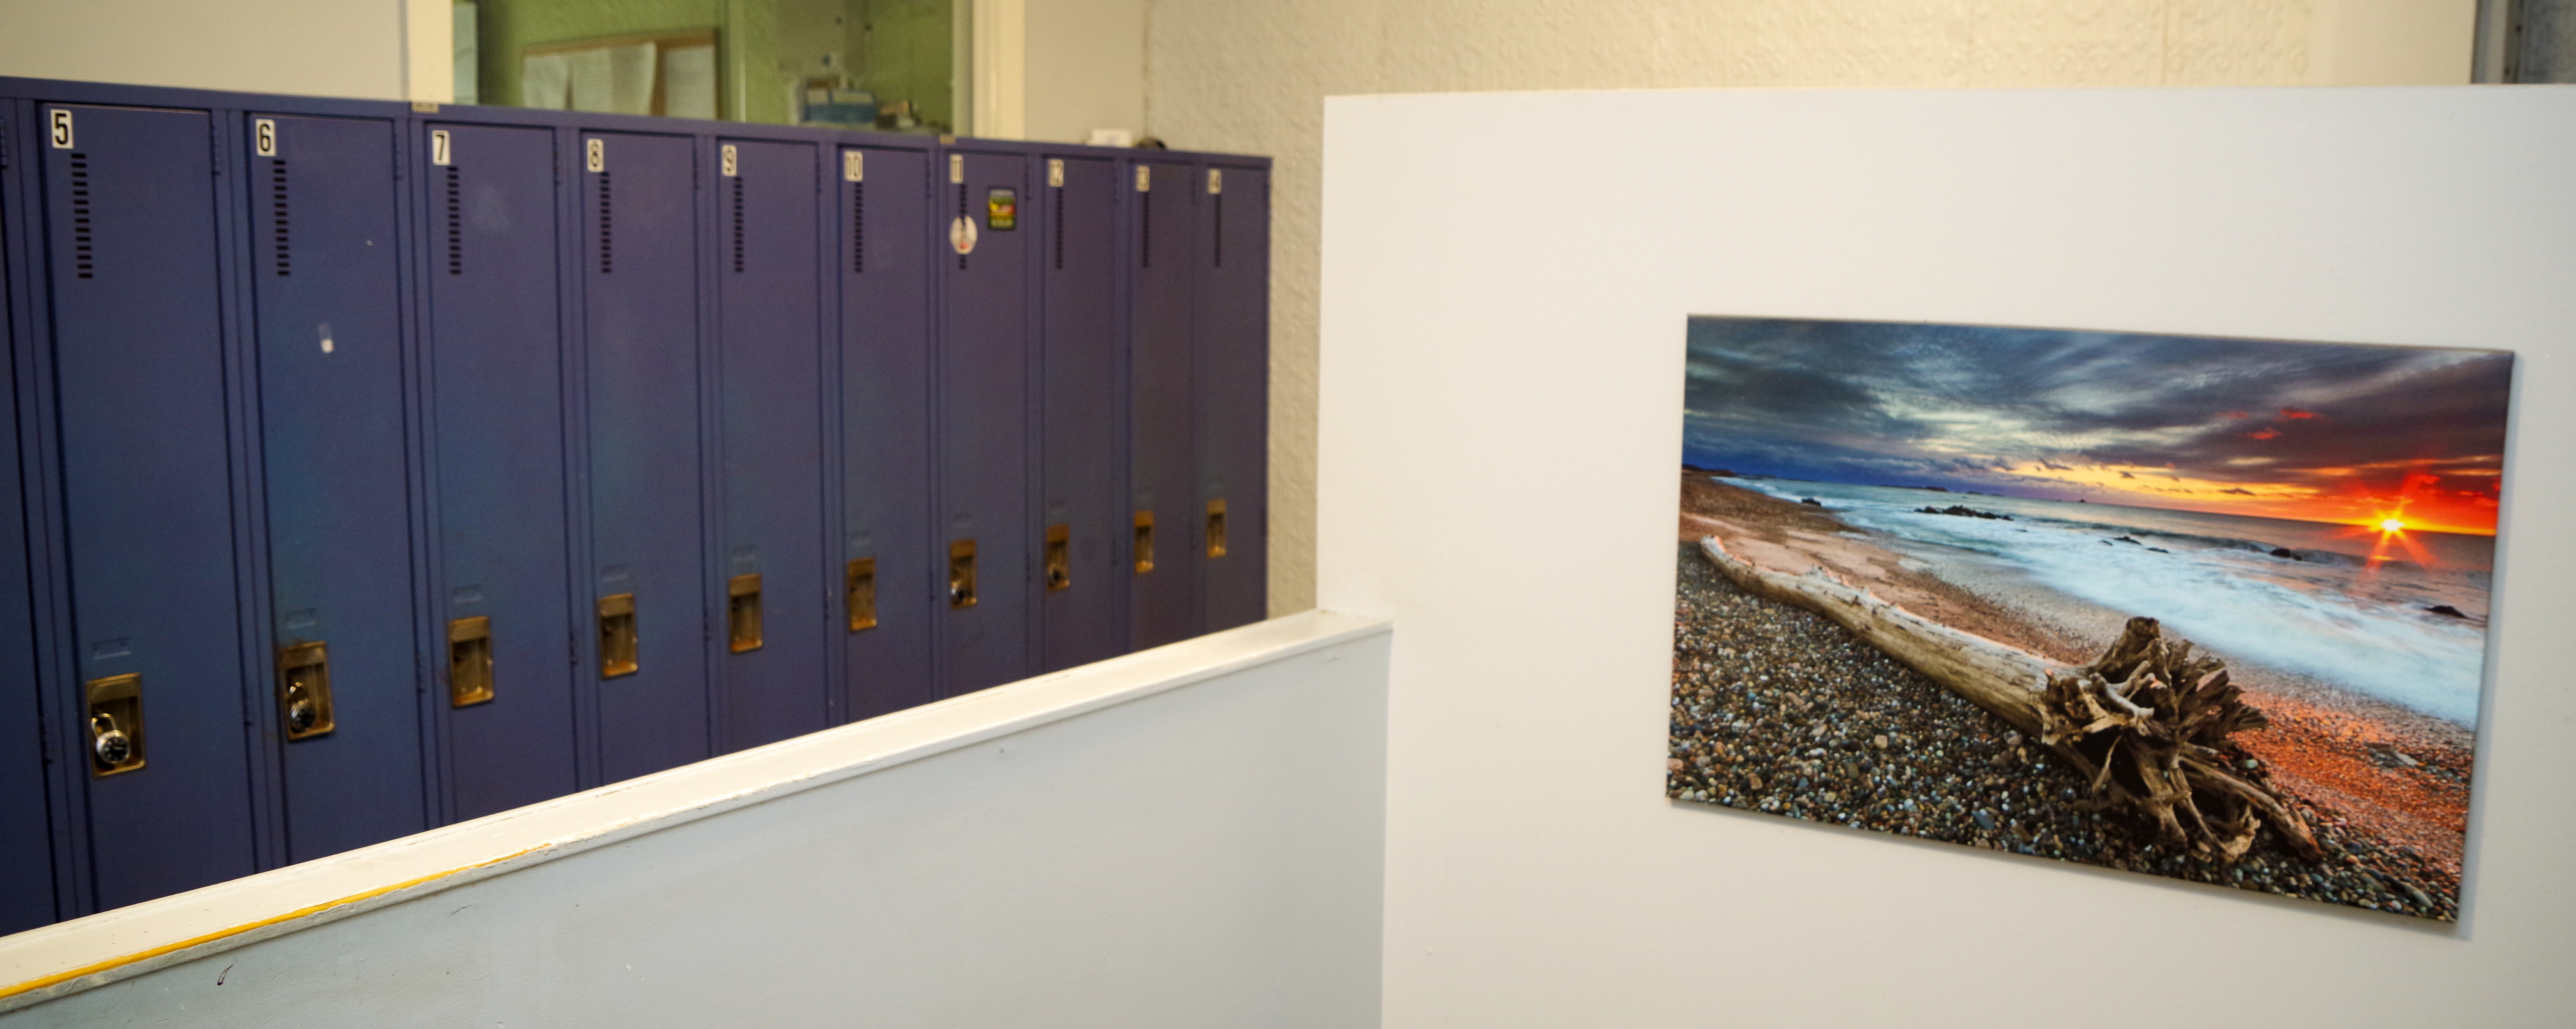 Blue locker room lockers behind white half wall, next to a poster of the ocean and pile of driftwood.